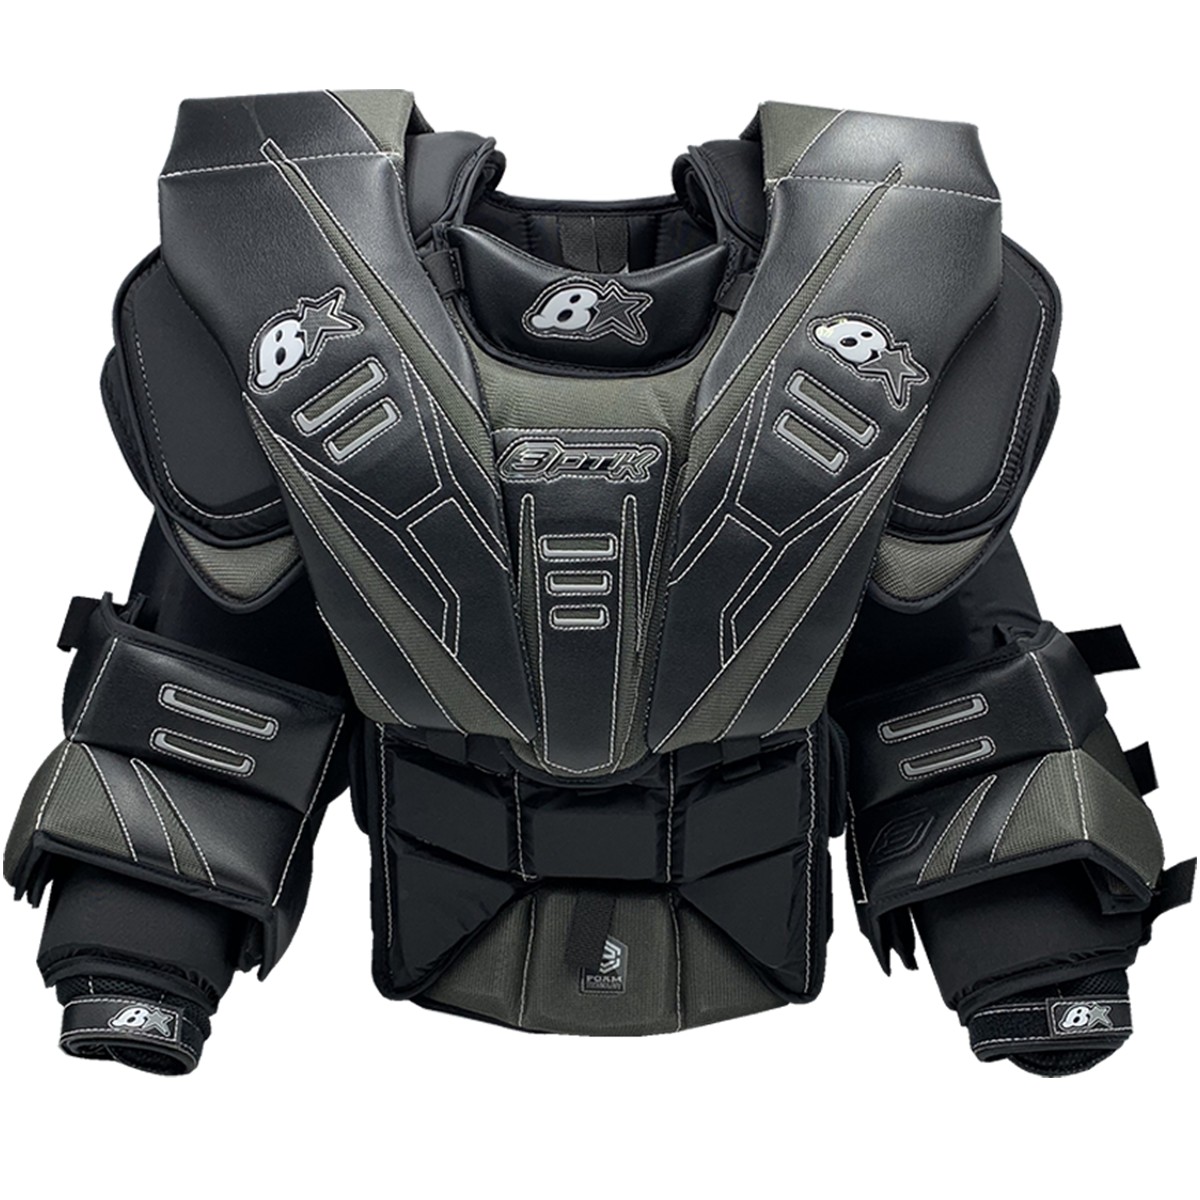 Senior Goalie Chest Protectors - Best Pricing in the Industry